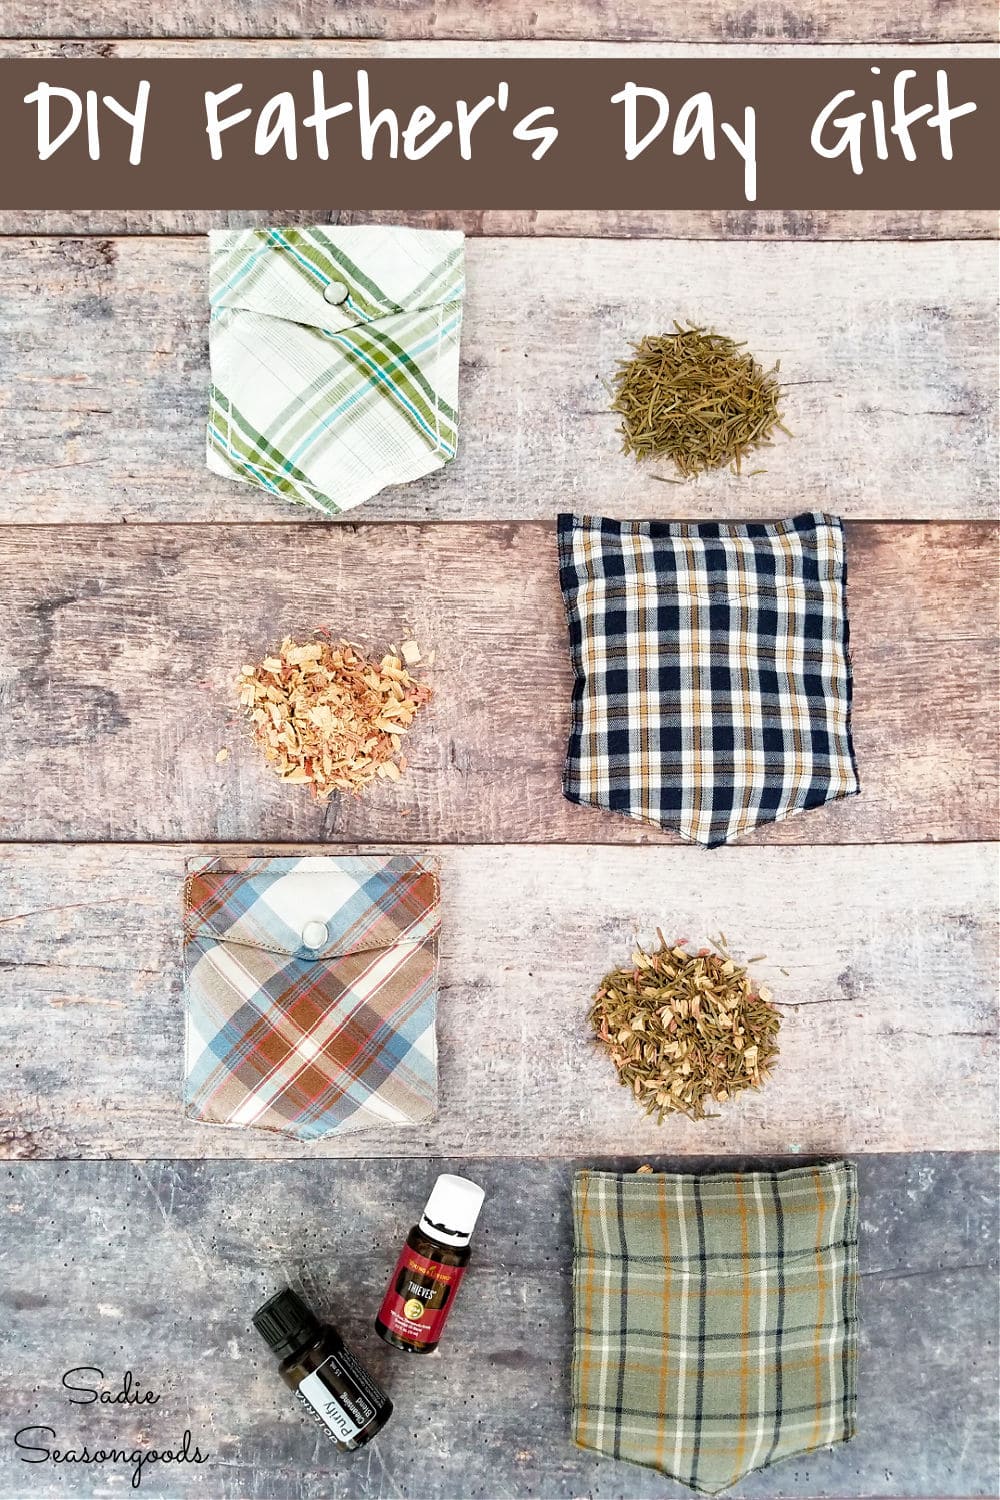 drawer sachets with woodsy scents